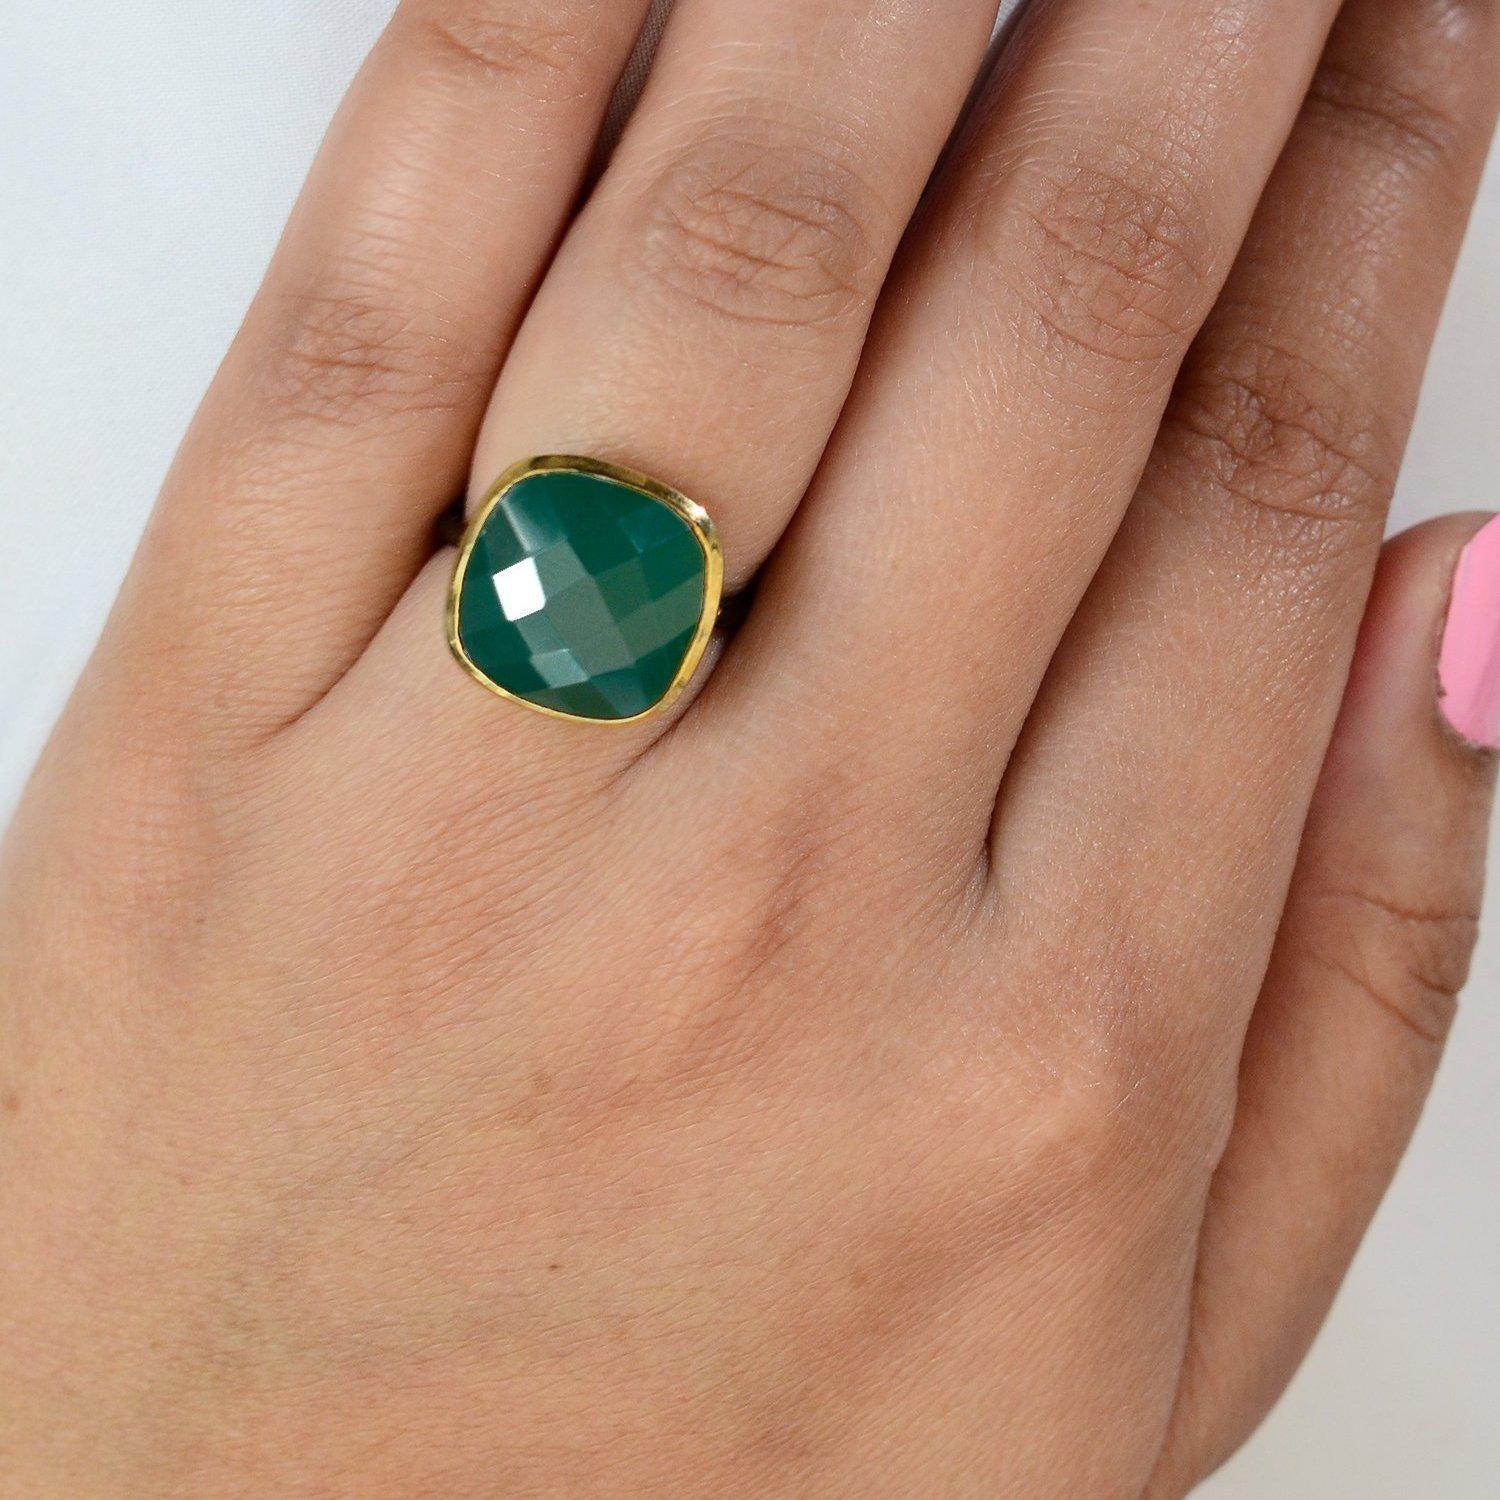 Green Onyx ring, Large gemstone ring, May Birthstone ring, Faceted bezel ring, Cushion shape ring, Birthday Gift for her, Everyday Ring